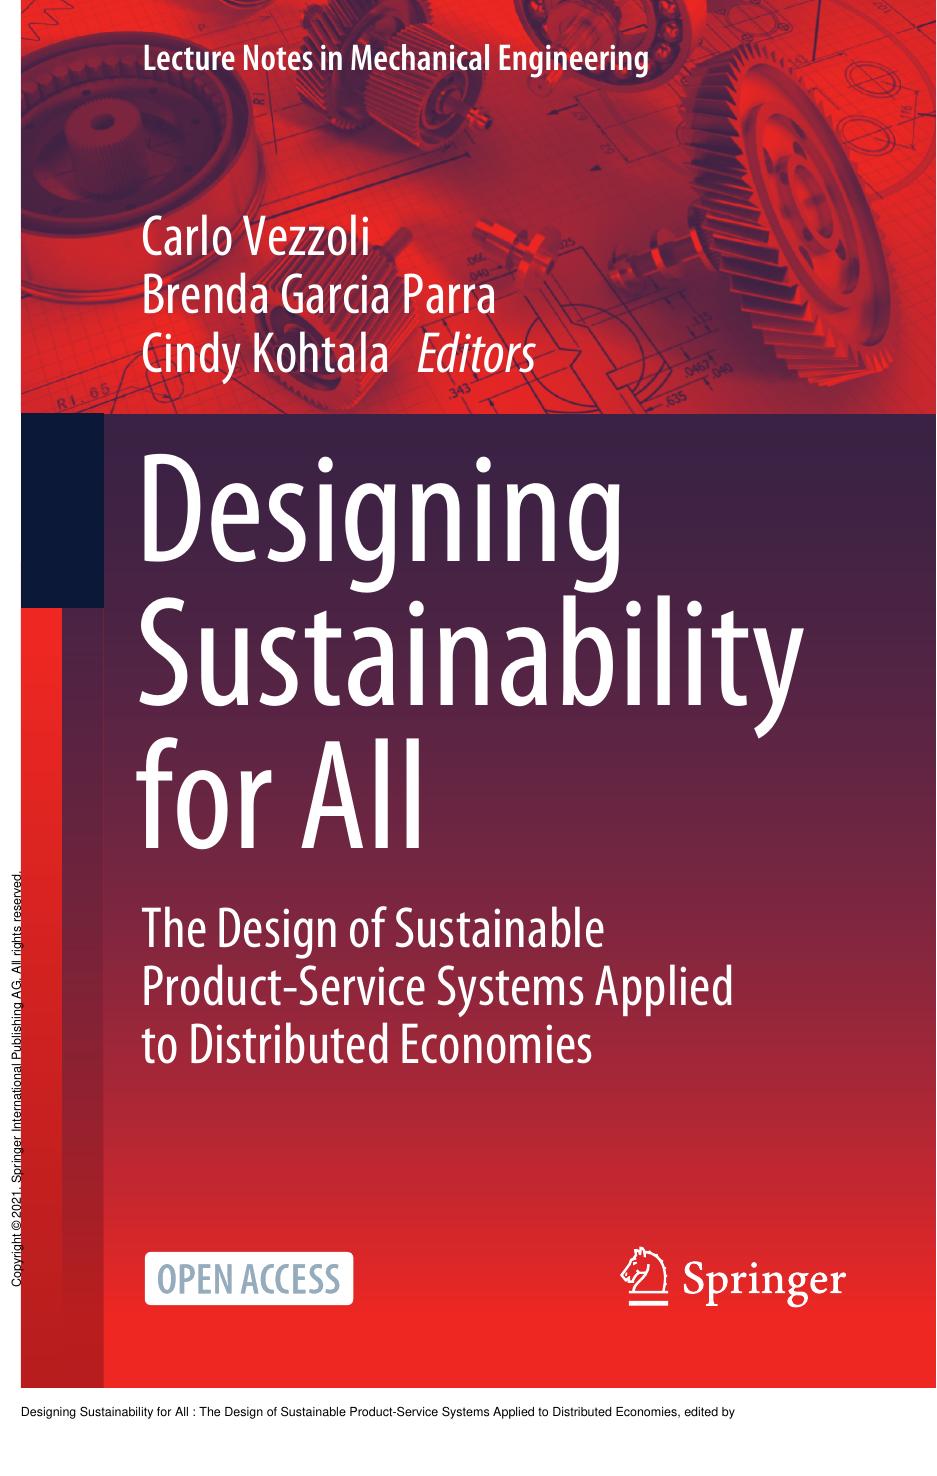 Designing Sustainability for All : The Design of Sustainable Product-Service Systems Applied to Distributed Economies by Carlo Vezzoli; Brenda Garcia Parra; Cindy Kohtala